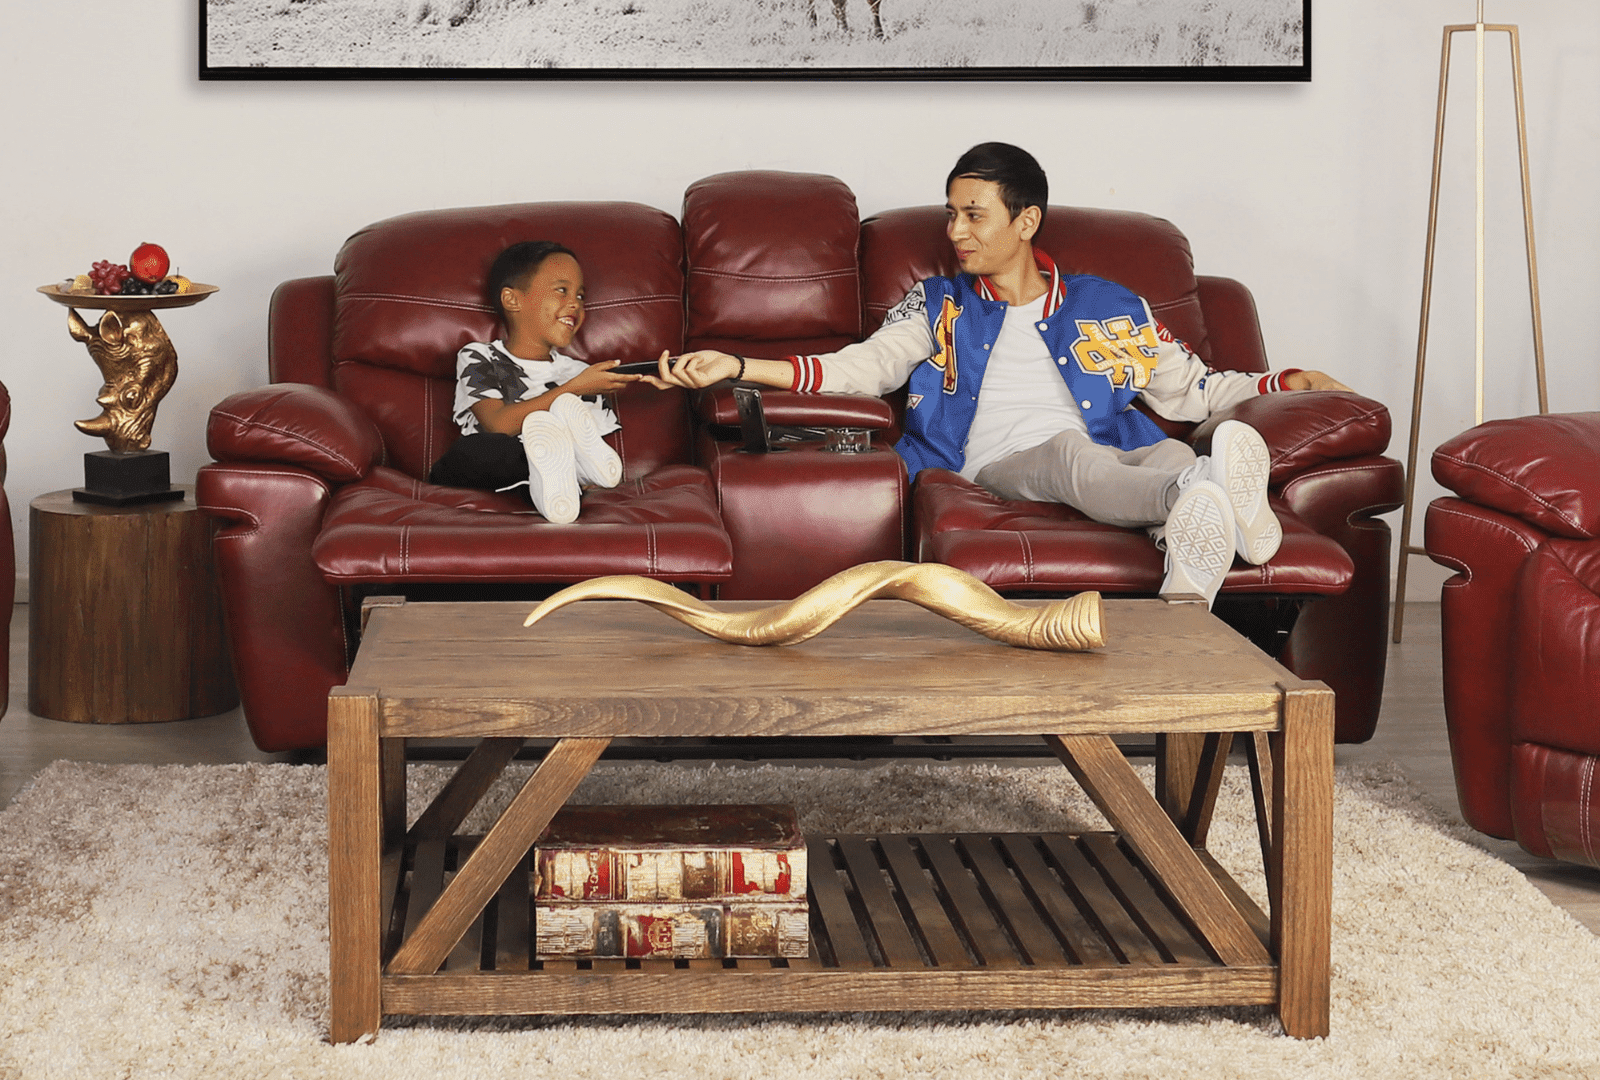 Father’s Day Gift Ideas: Elevate Your Dad’s Comfort and Style with Luxurious Home Furniture & Décor